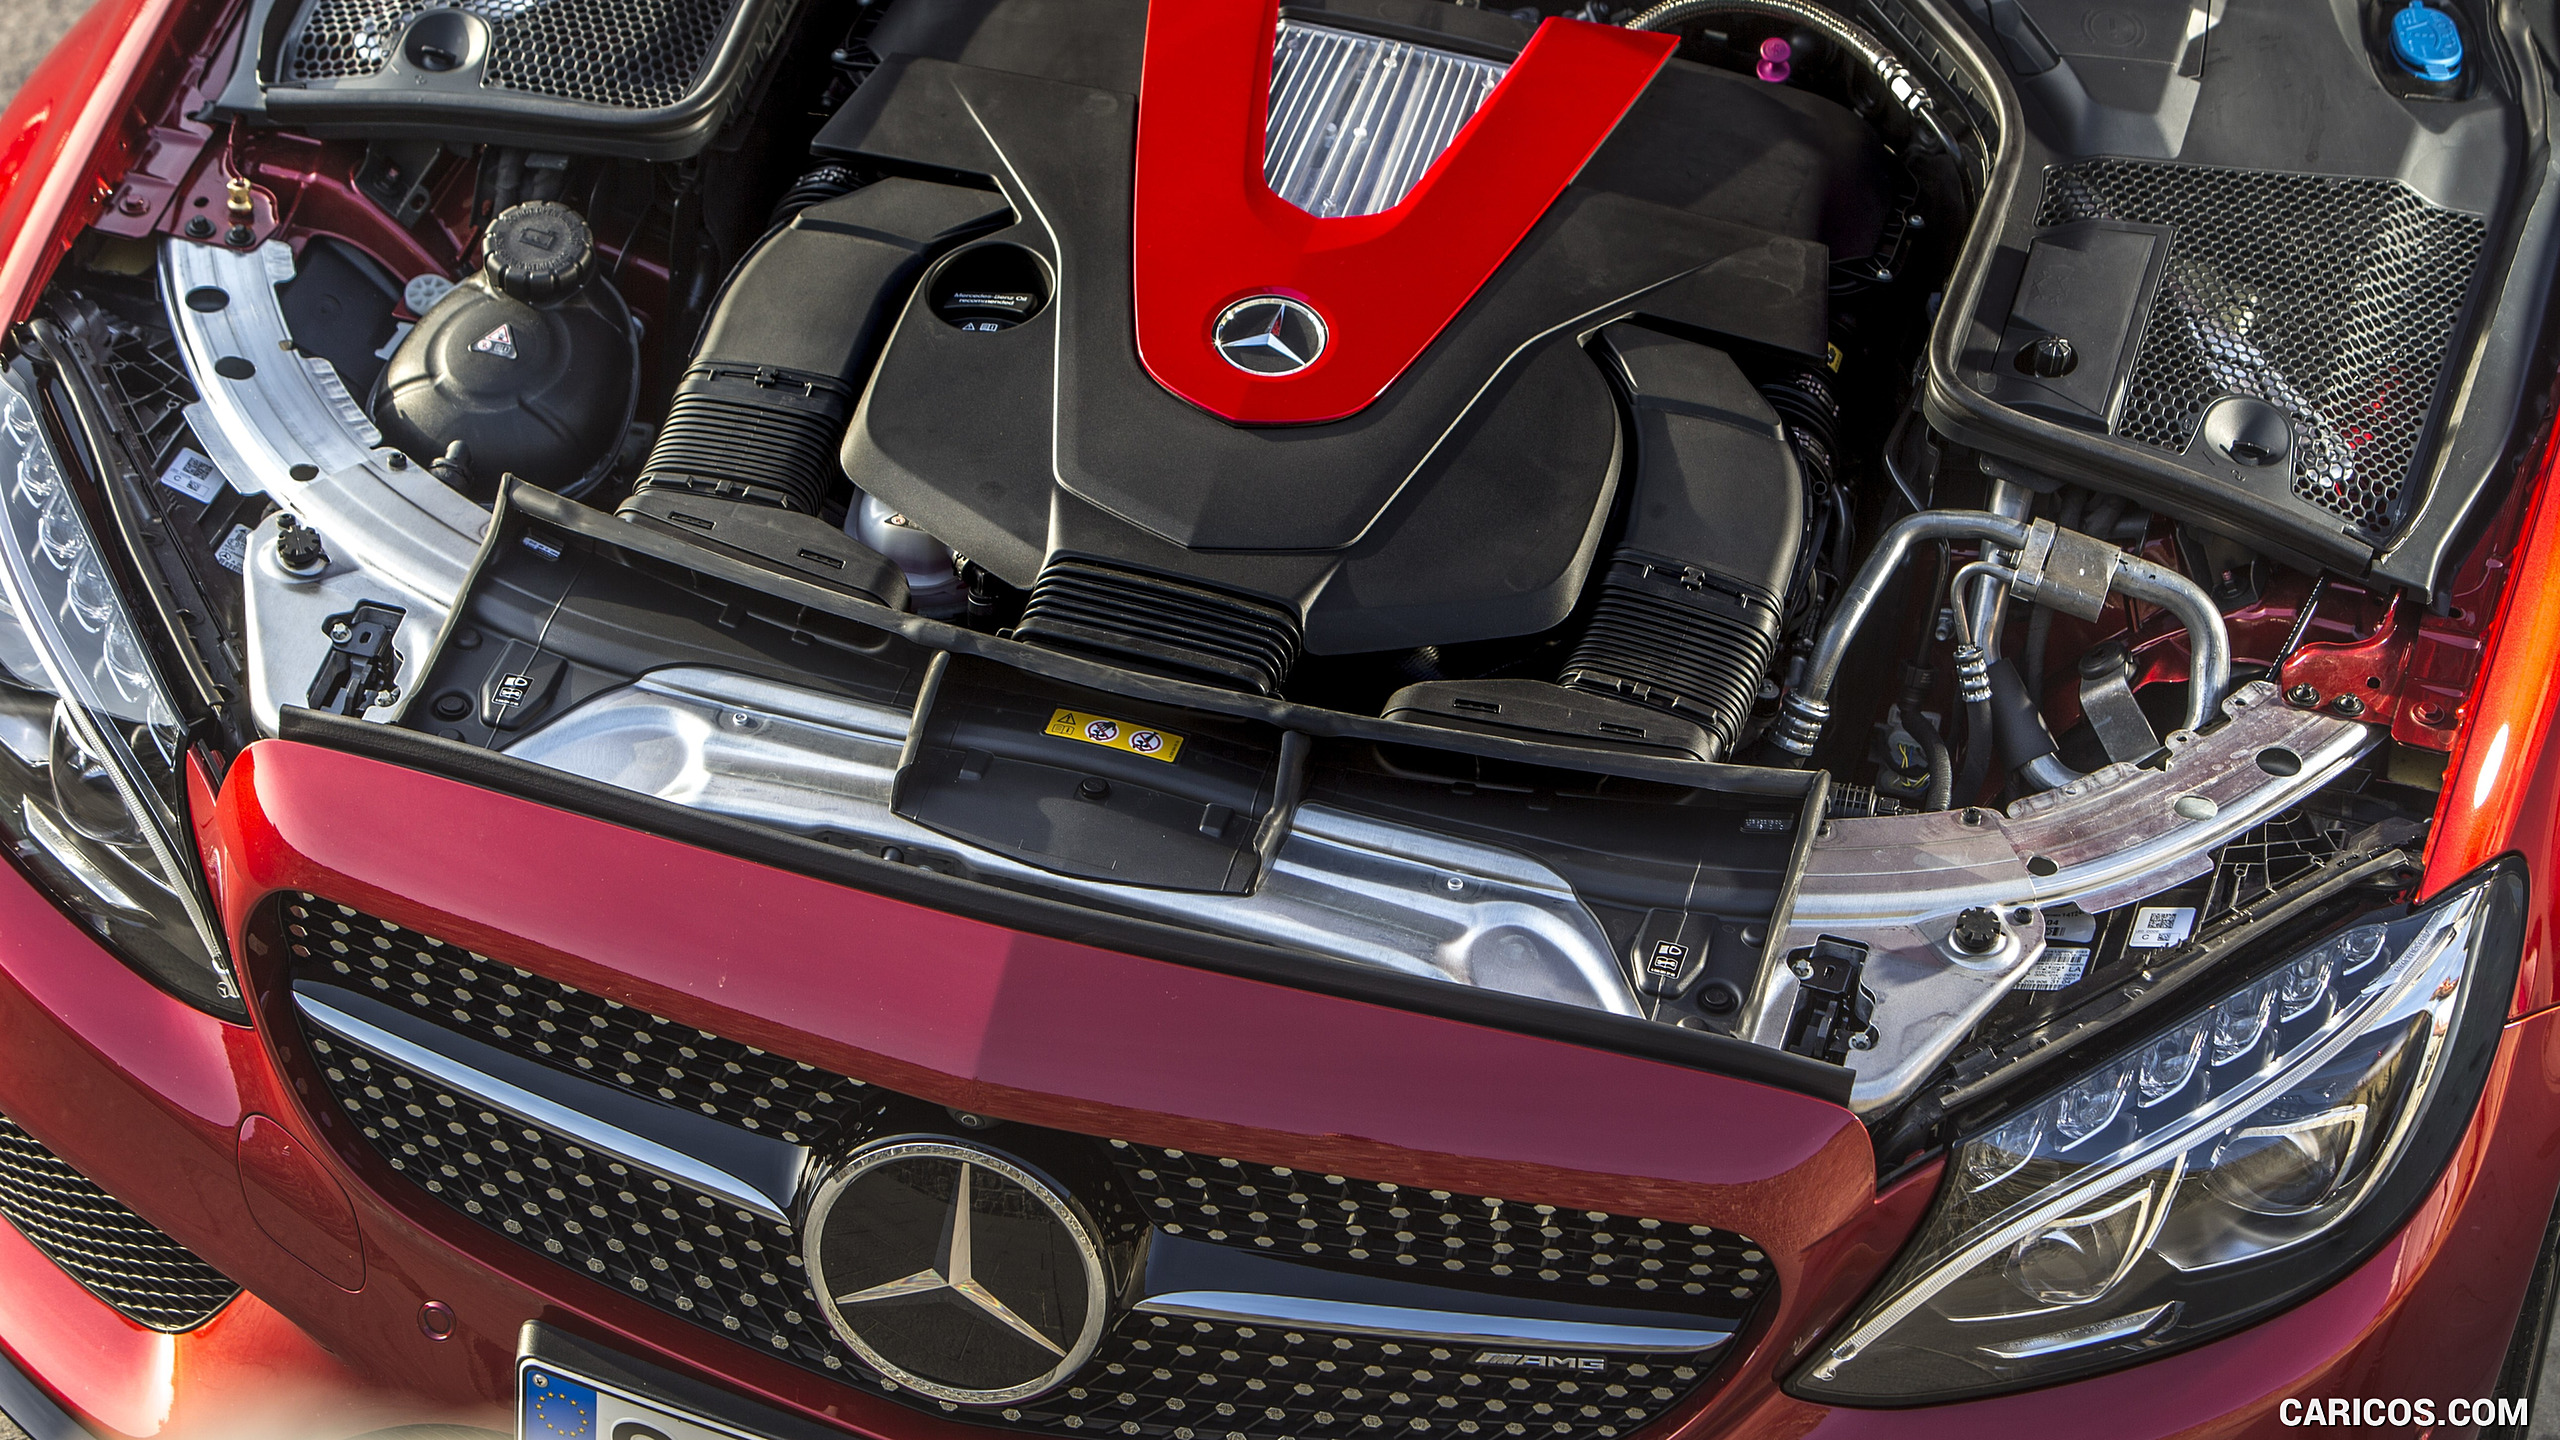 2017 Mercedes-AMG C43 4MATIC Coupé - Engine, #28 of 30